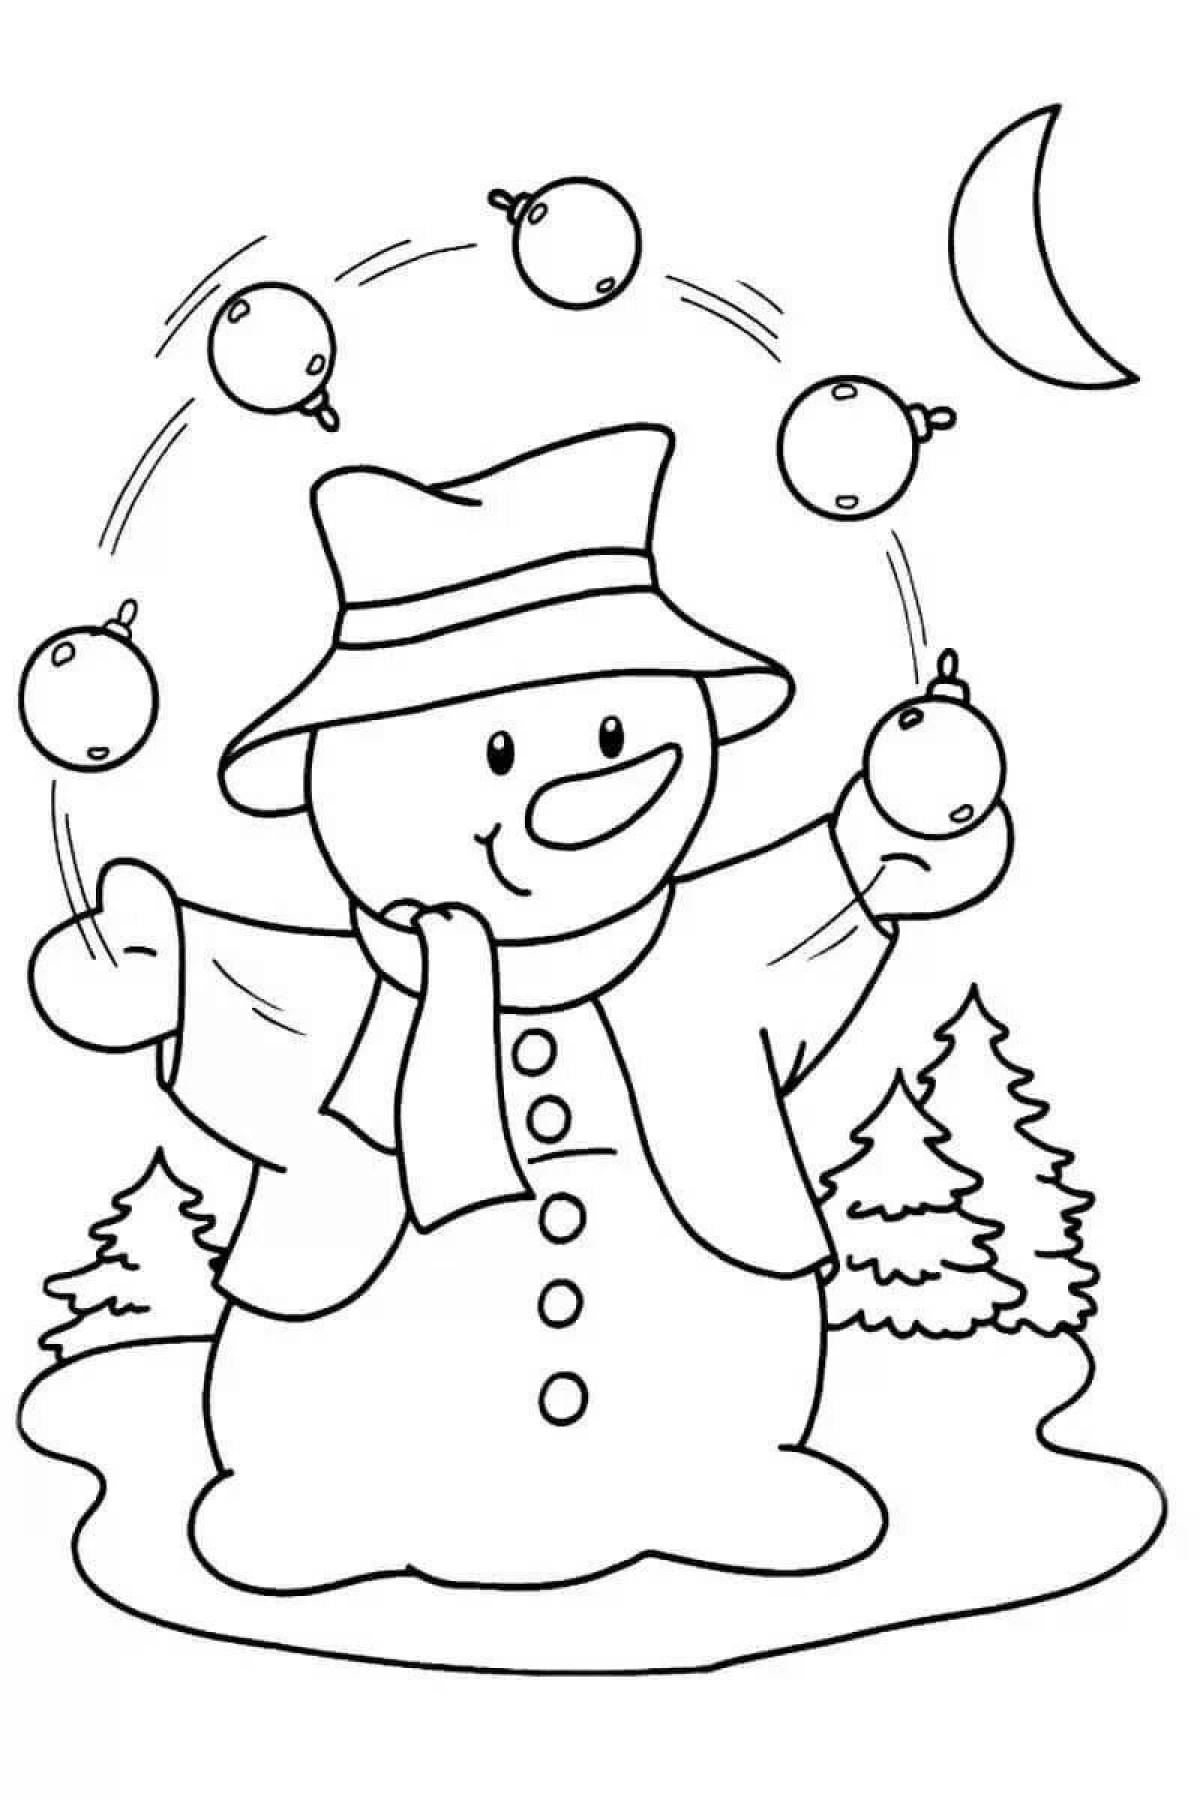 Coloring page of an enthusiastic birthday snowman